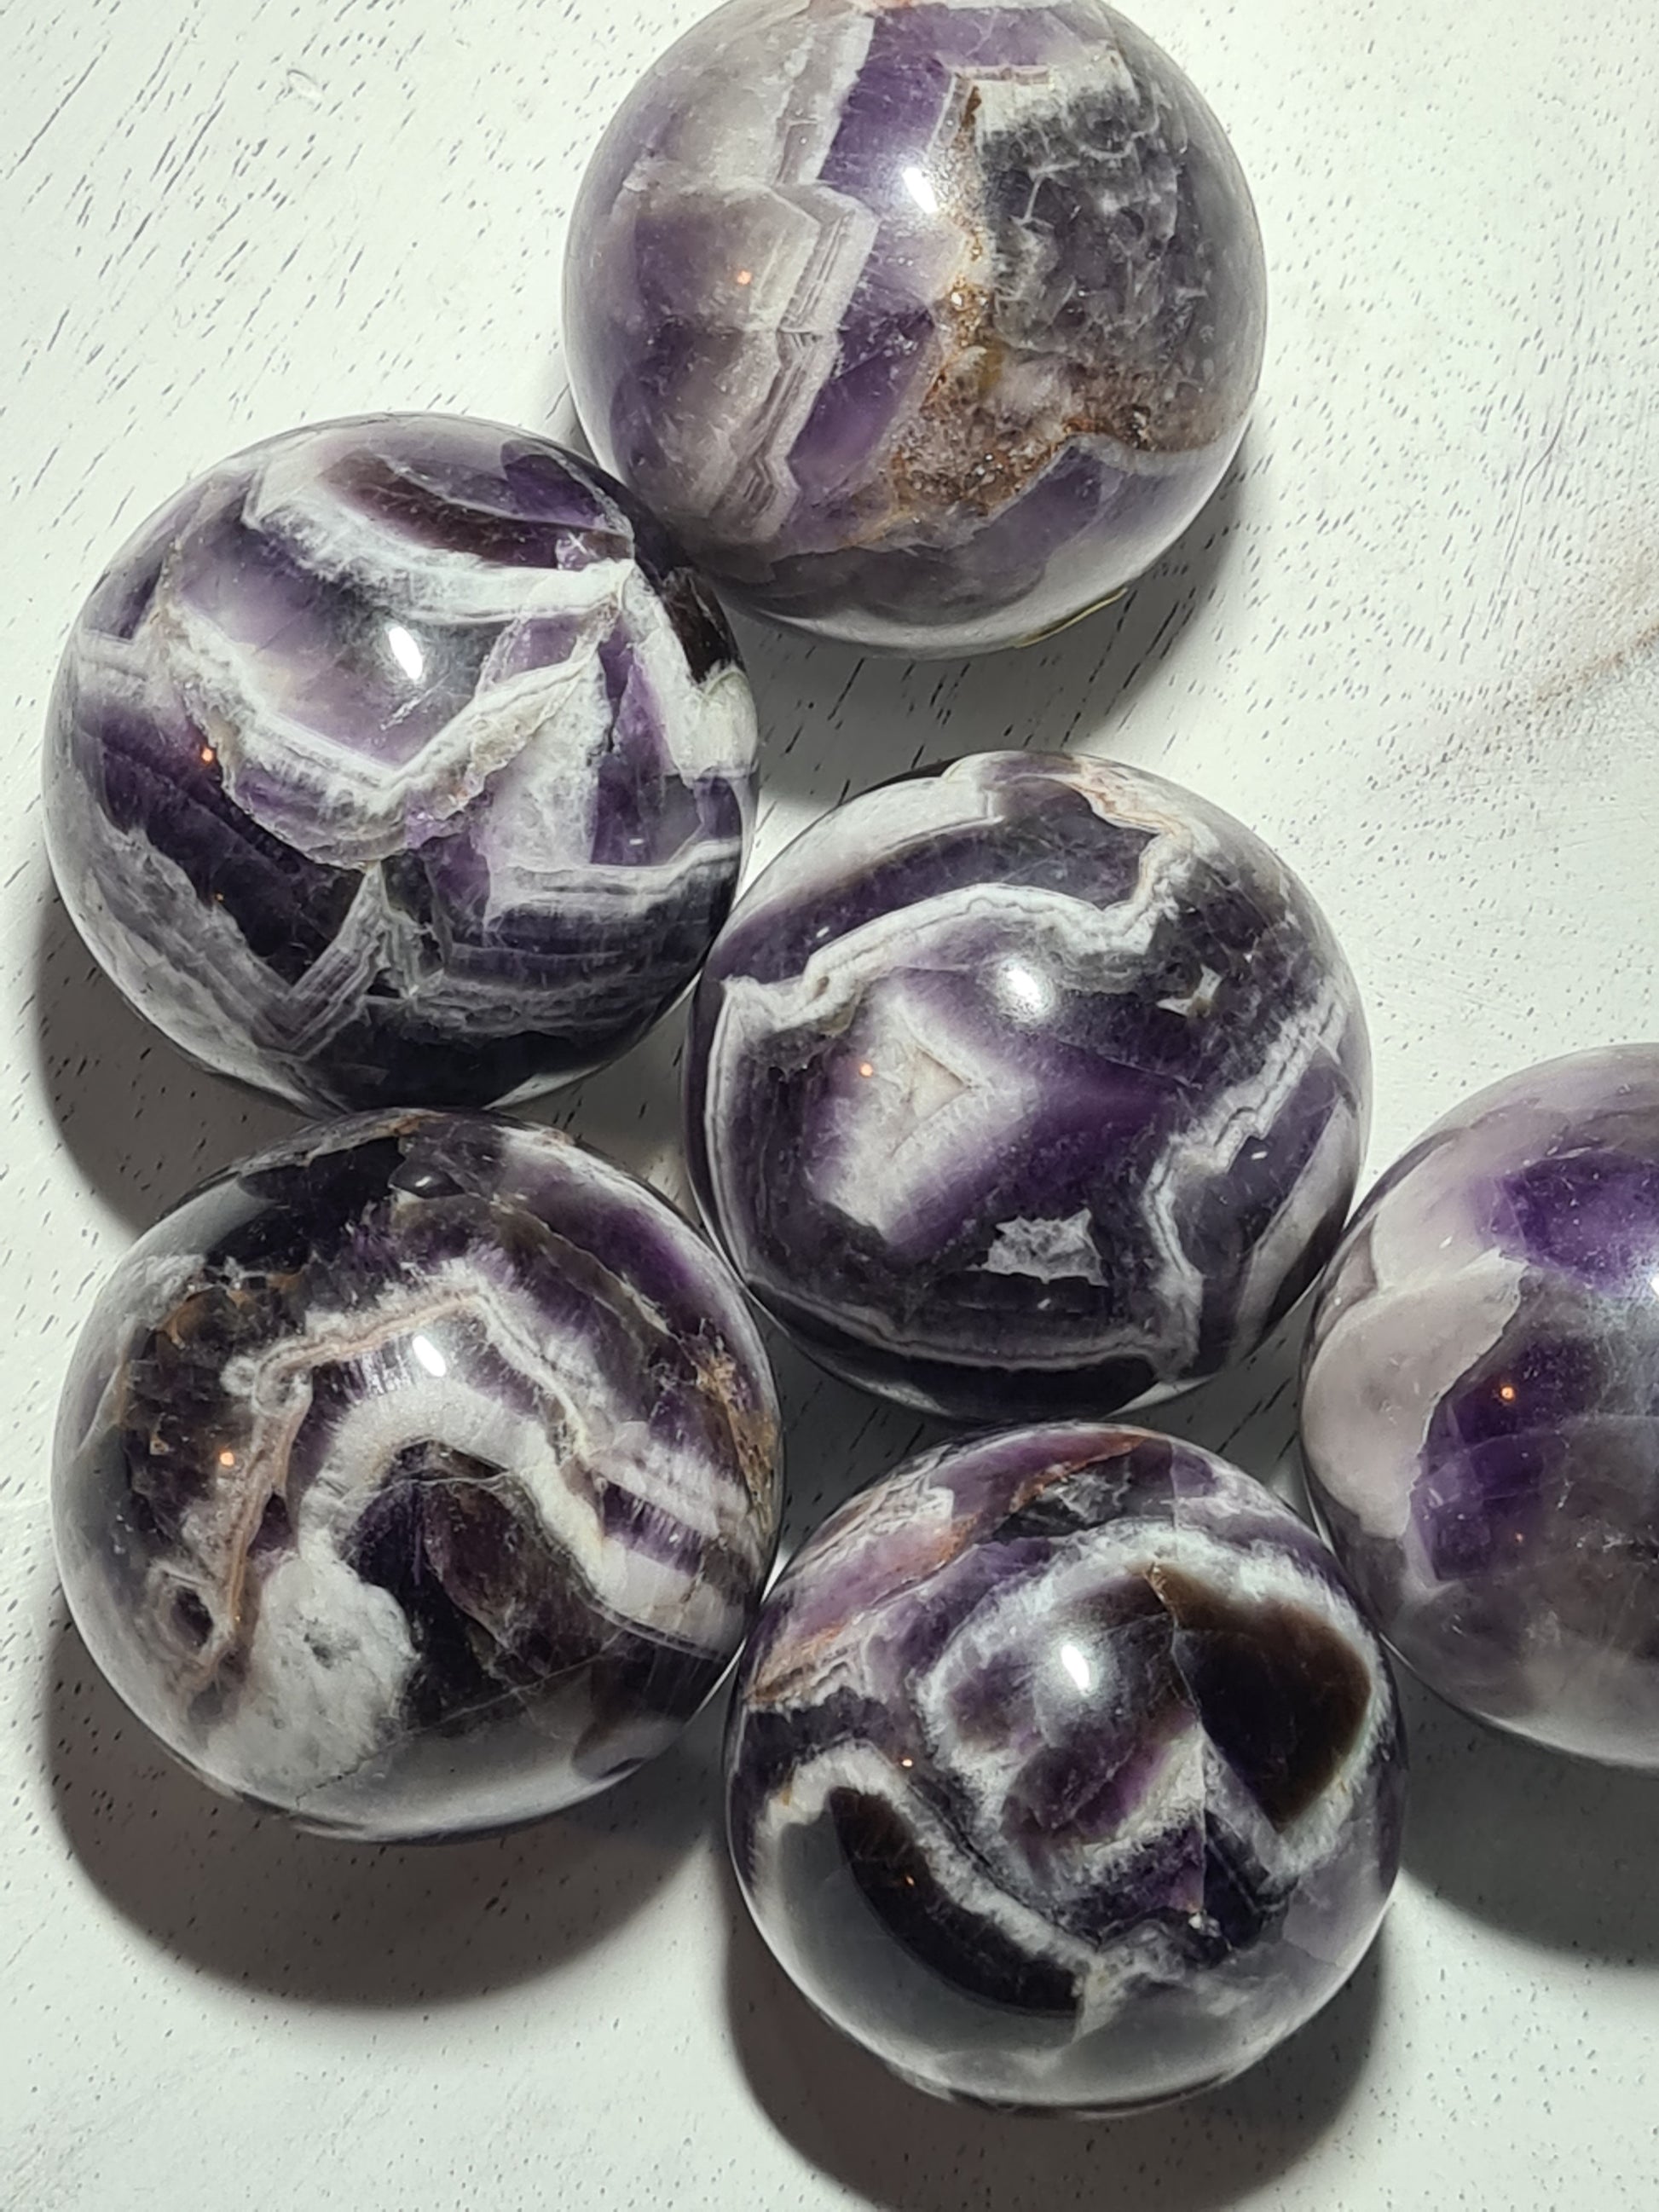 Dream Amethyst Spheres with deep purple colour and c;ear quartz chevron shaped banding. measuring between 40mm and 47mm diameter. You choose from the drop down menu.